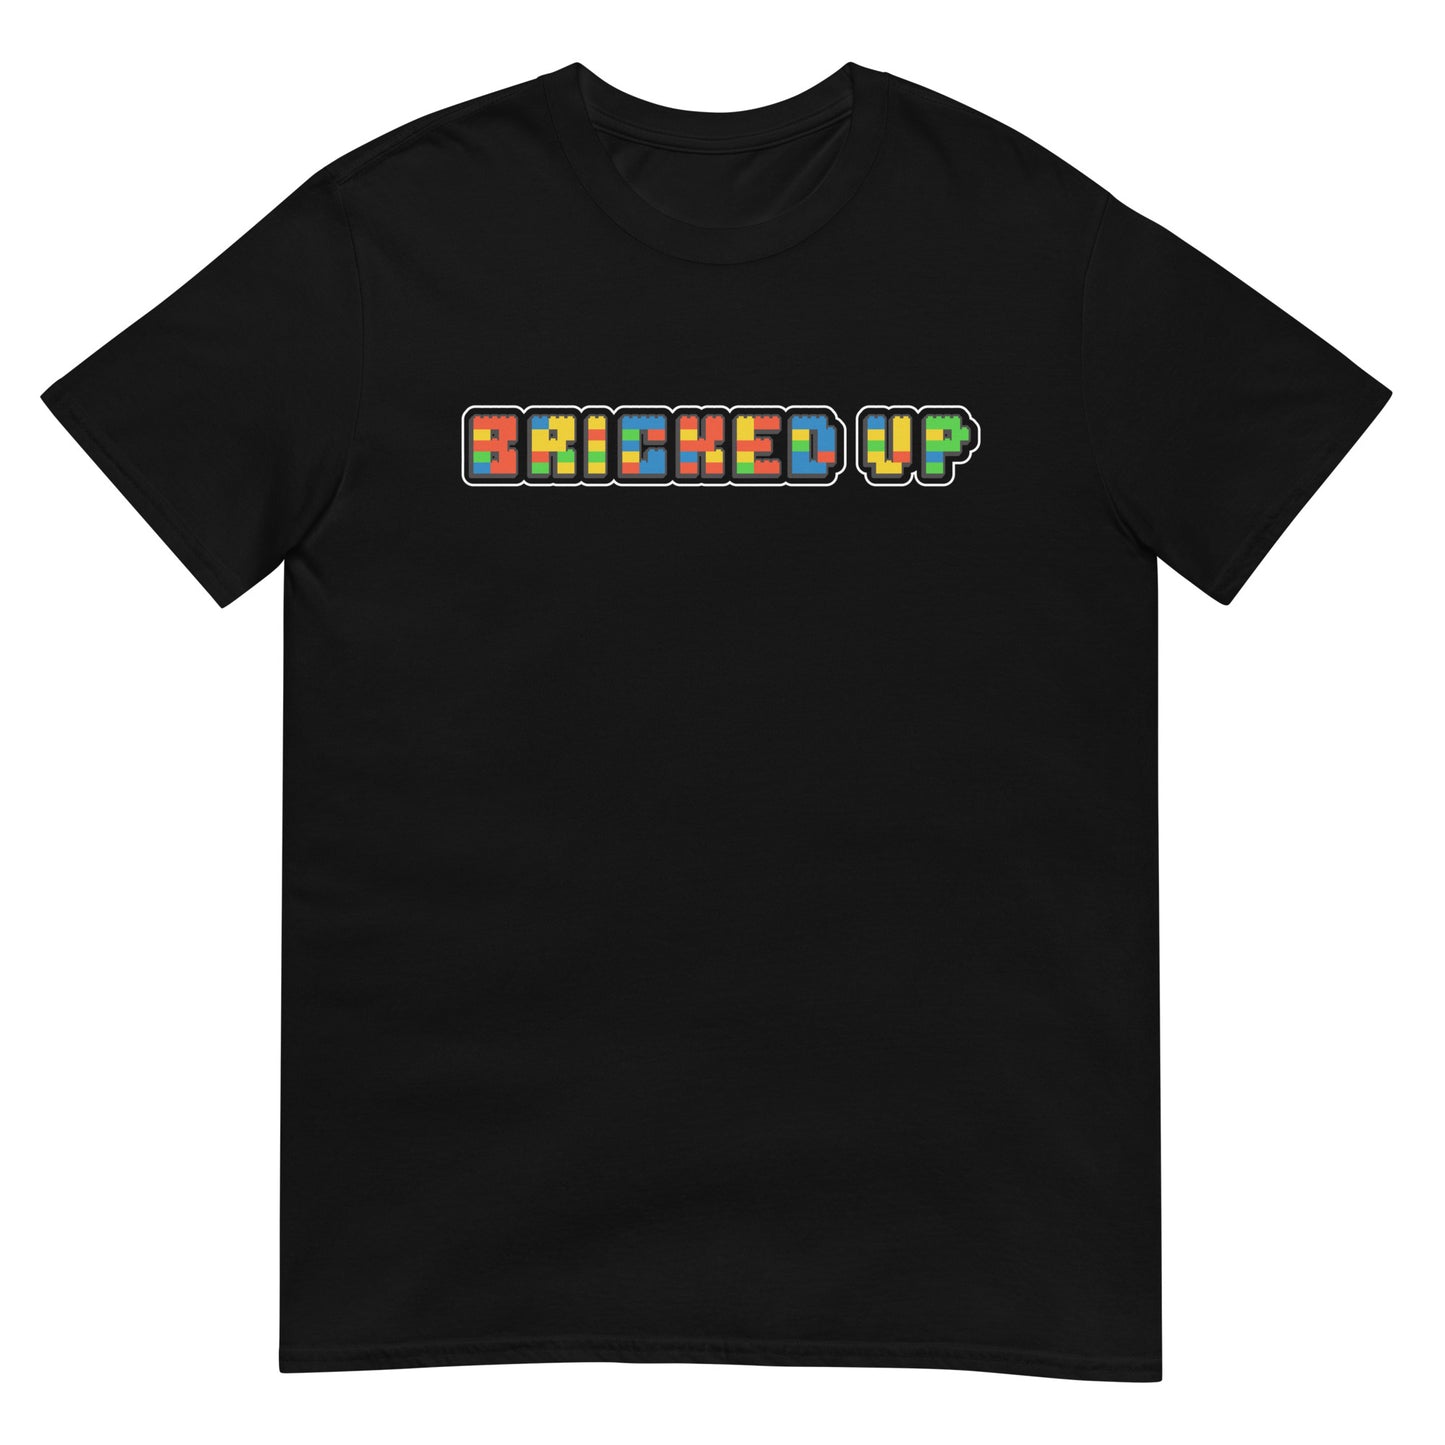 Bricked Up - Funny AFOL T-Shirt